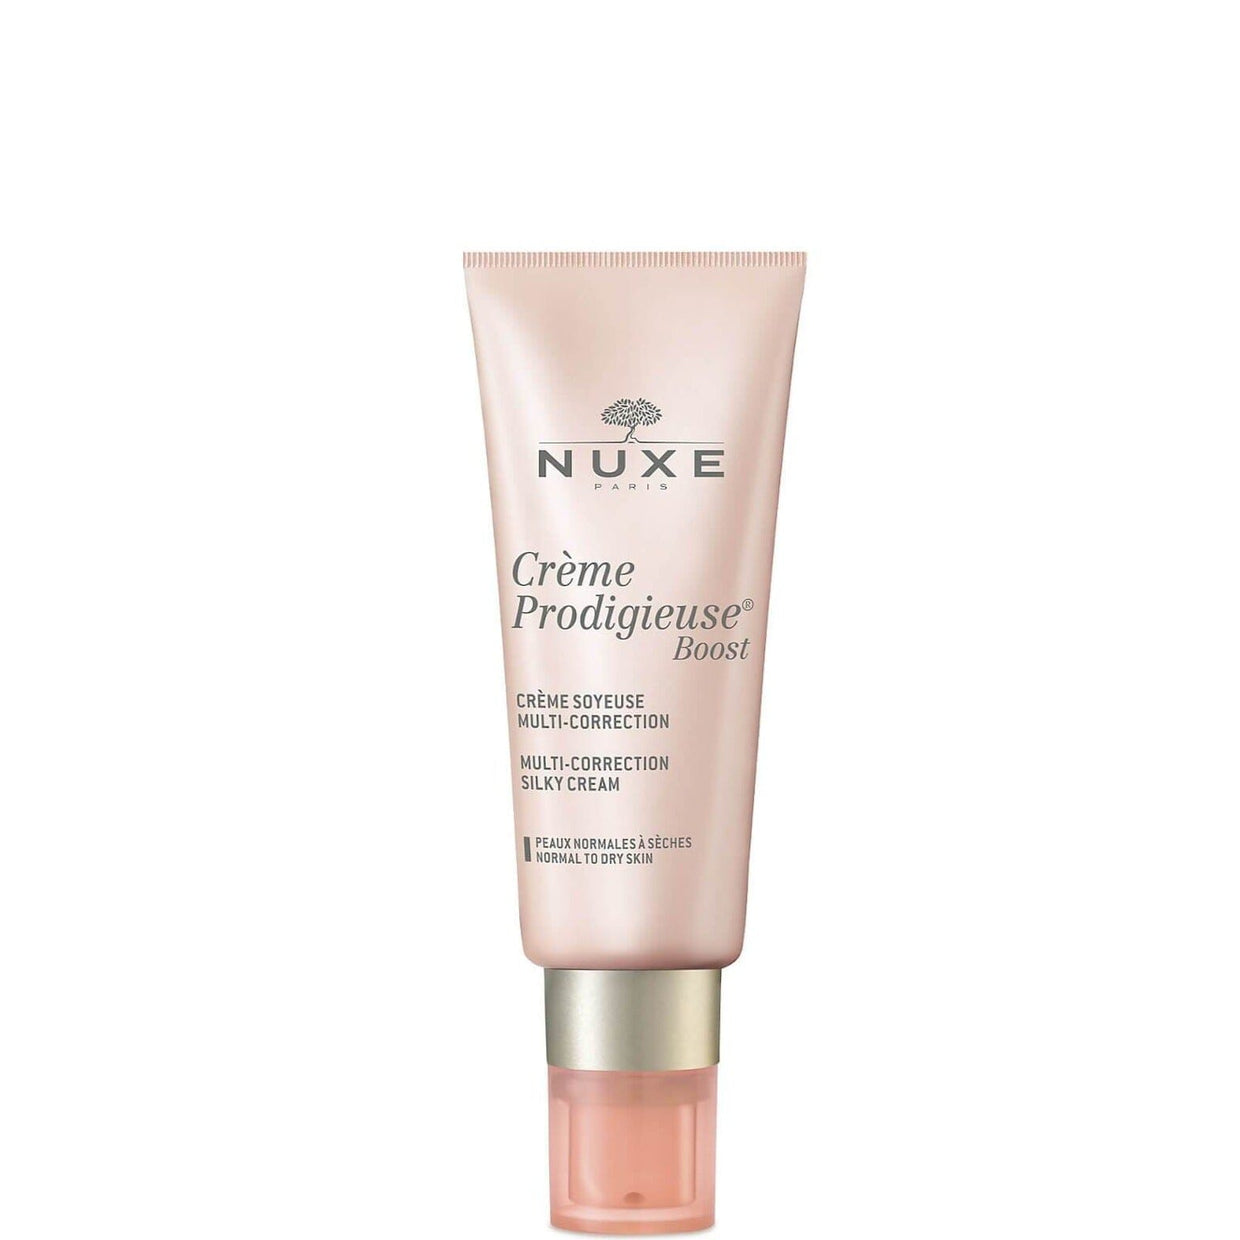 Nuxe Creme Prodigieuse Boost Multi-Correction Silky Cream Nuxe 40 ml Shop at Exclusive Beauty Club